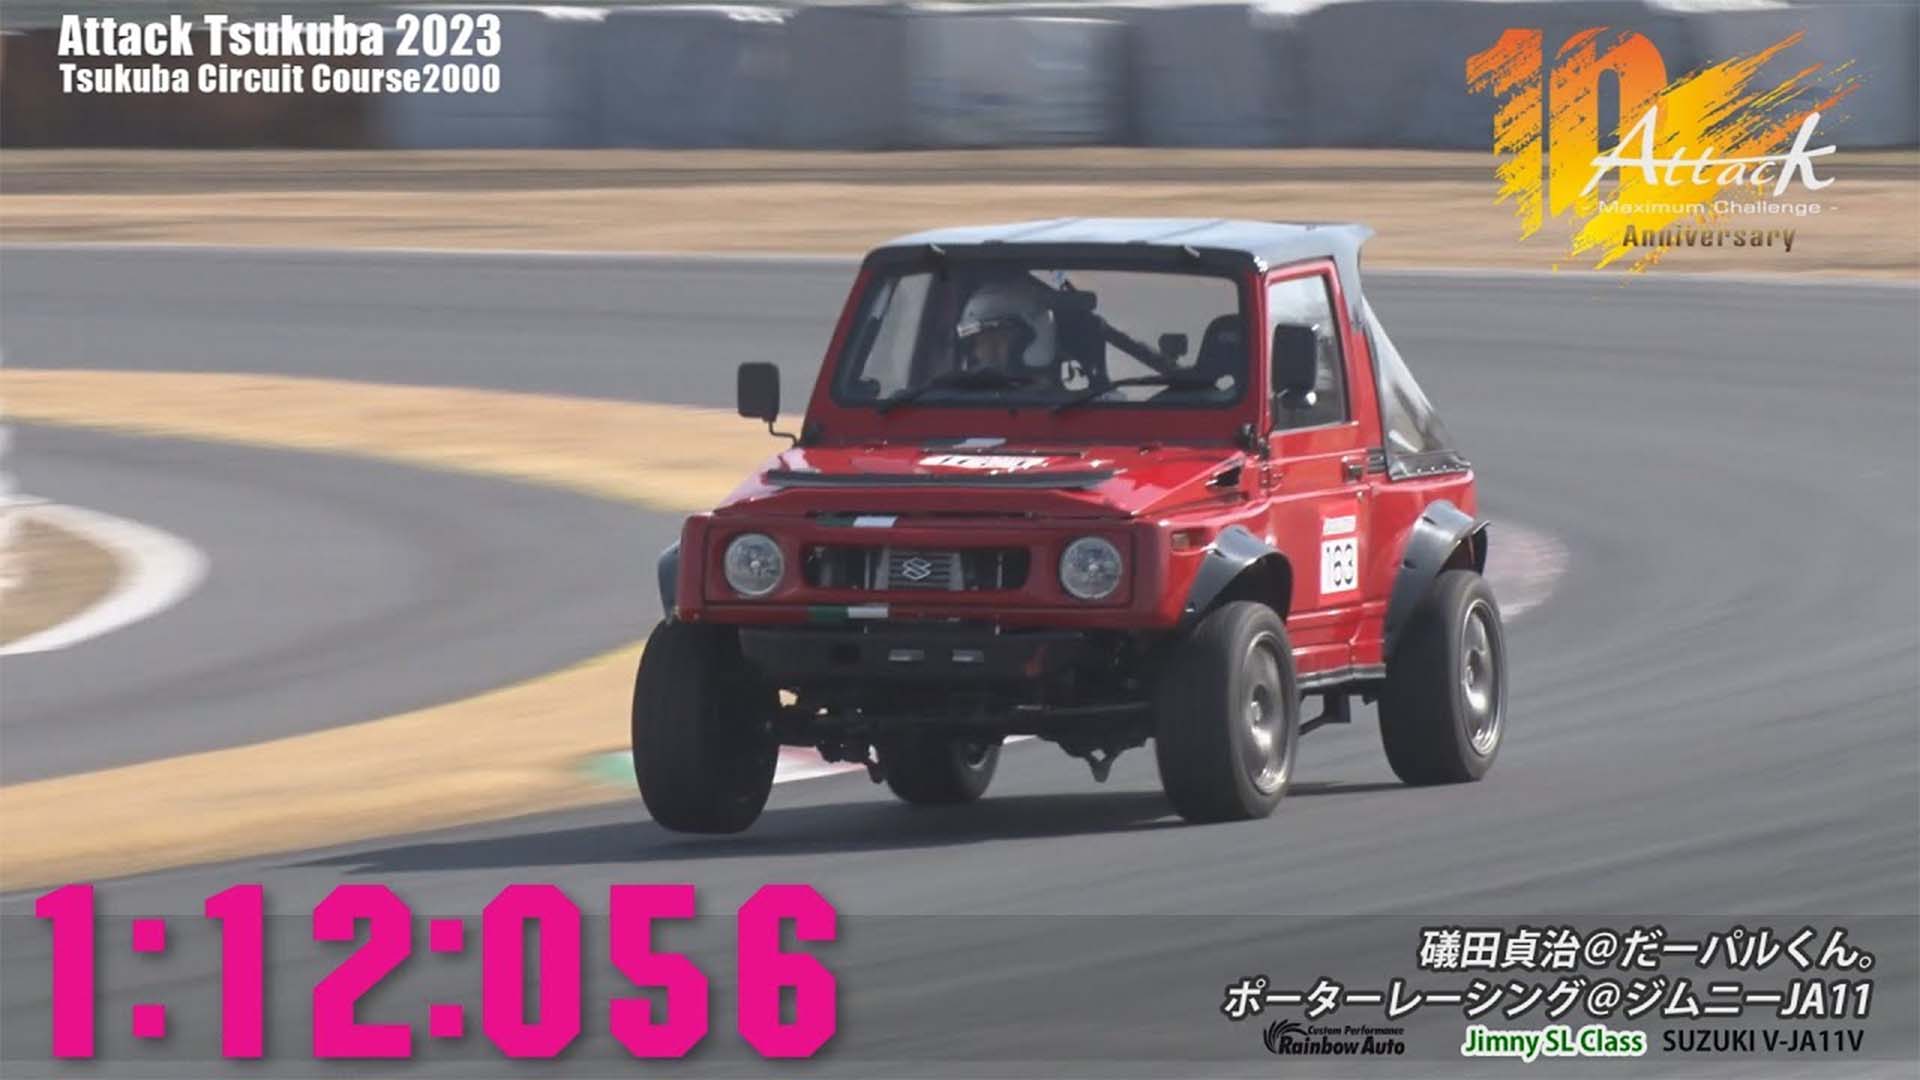 These Suzuki Jimny Time Attack Cars Look So Happy To Go Racing